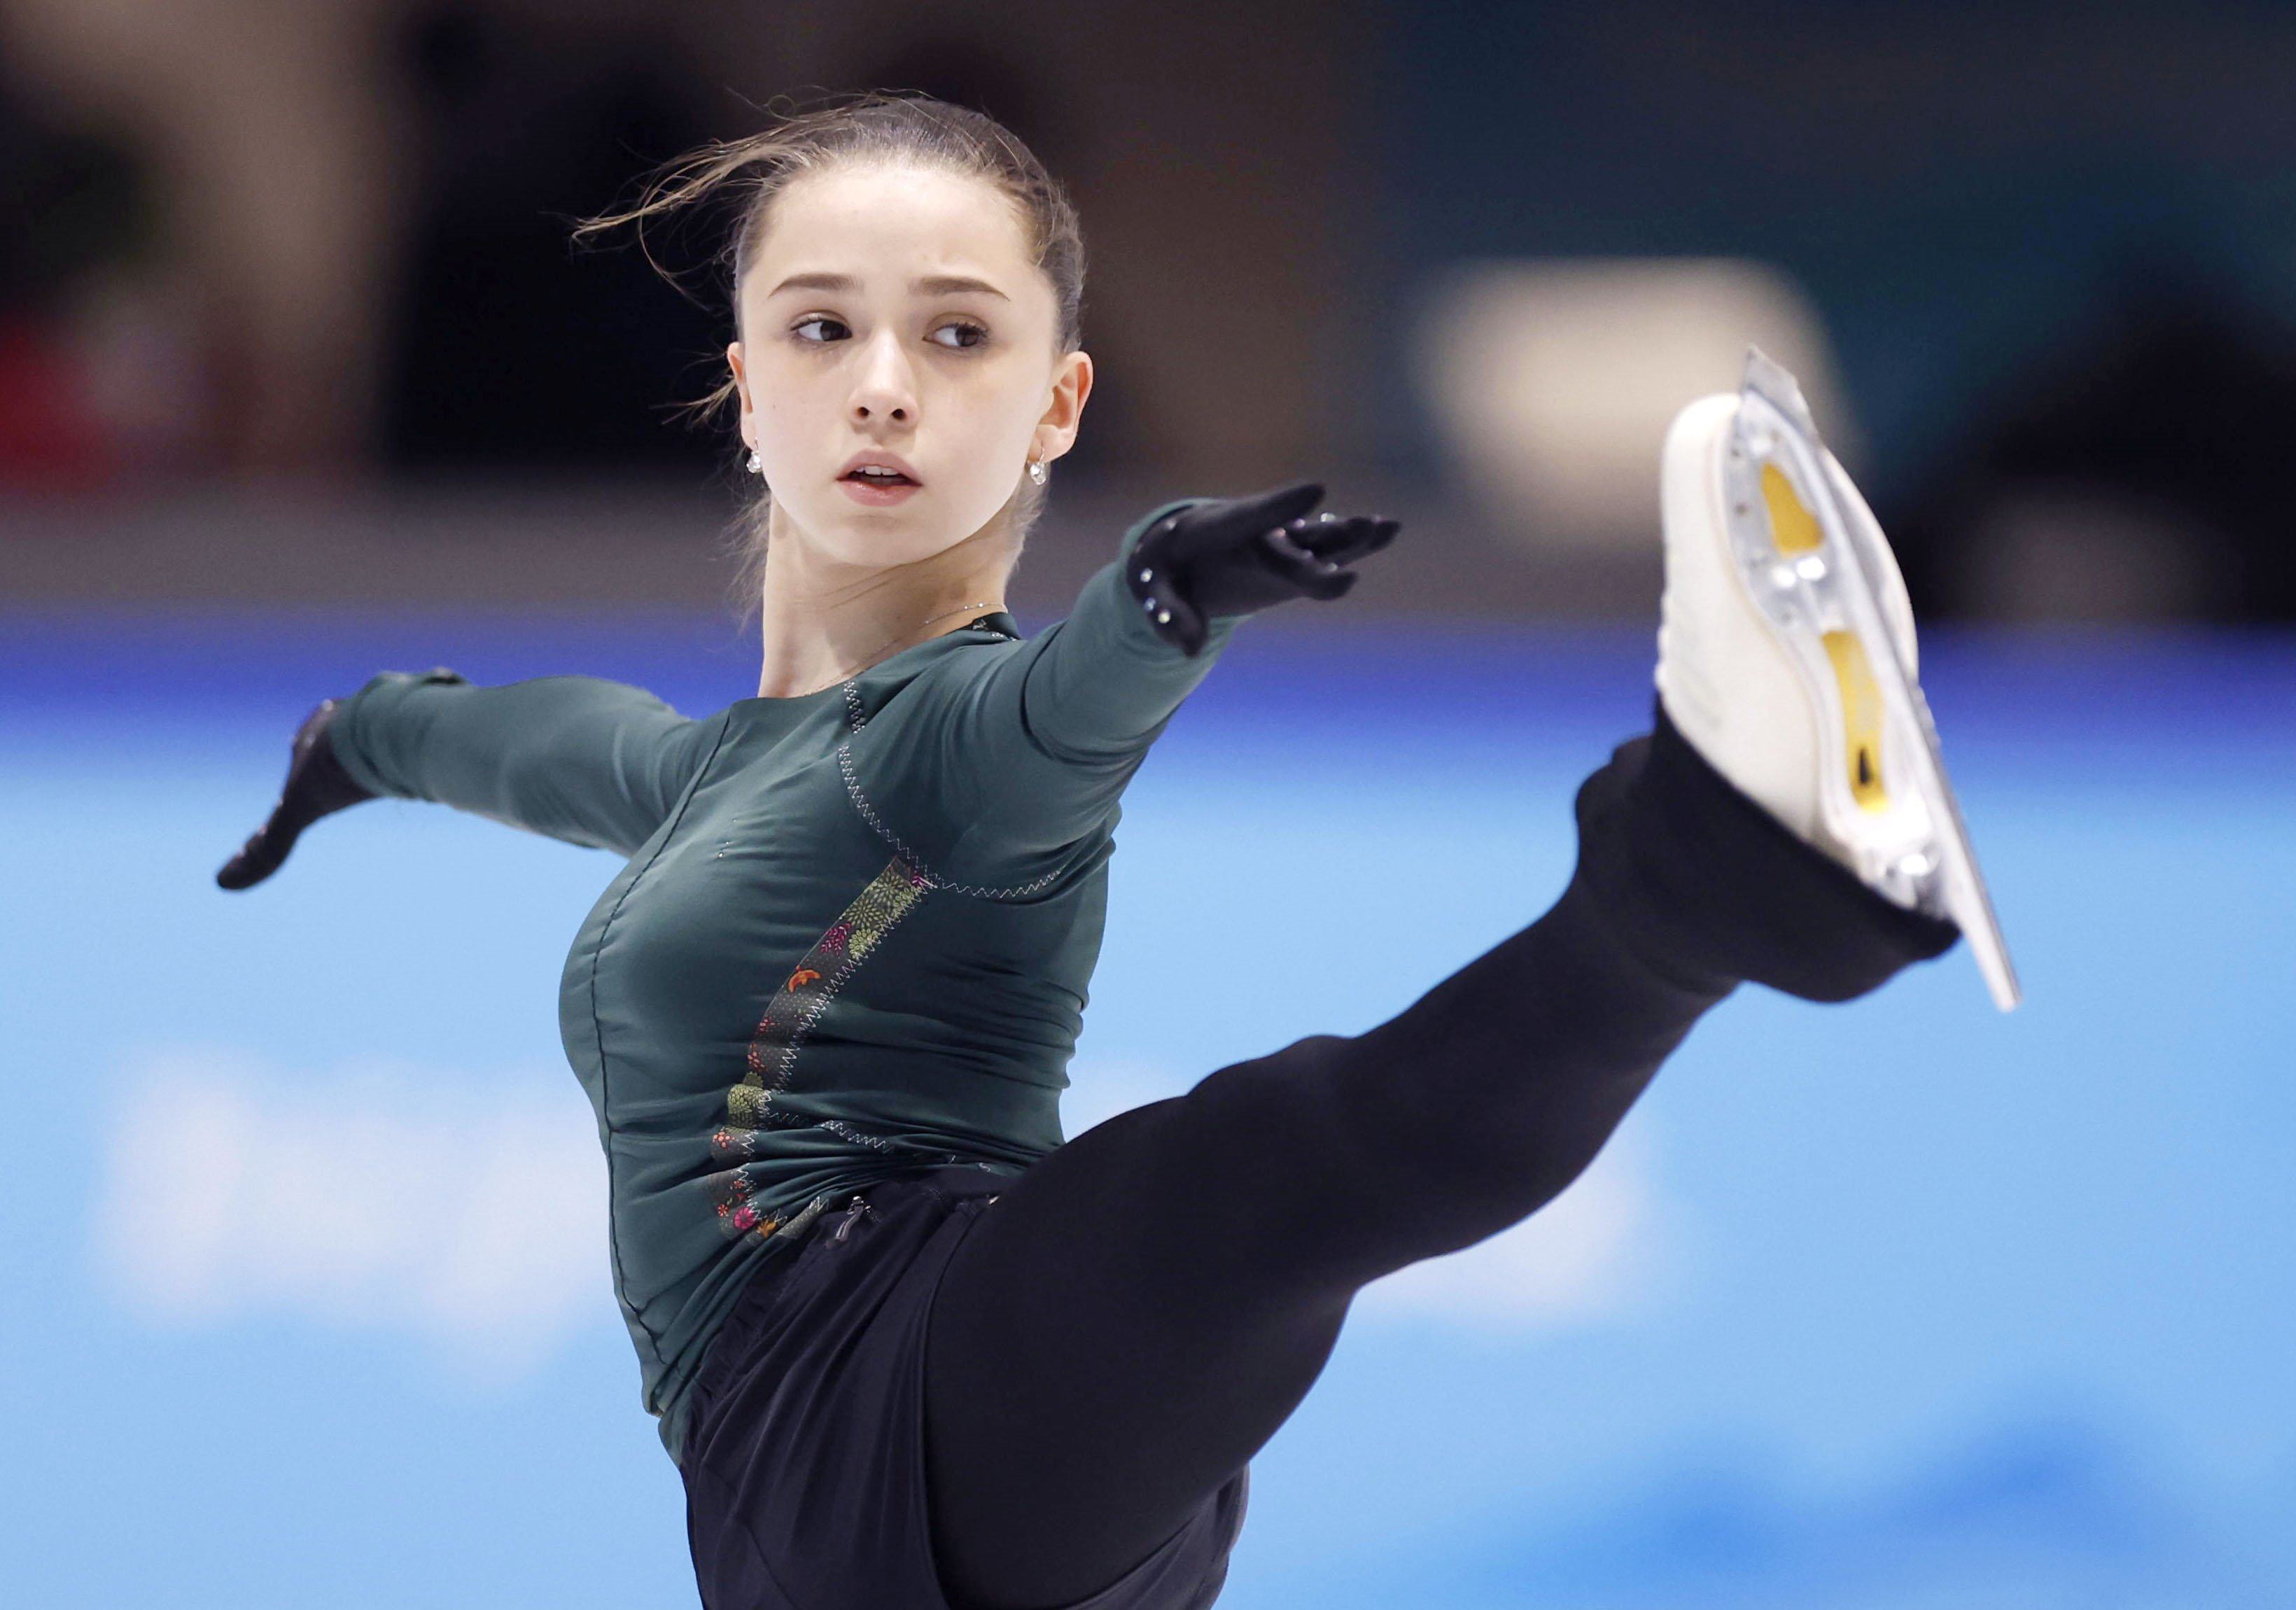 Russian Olympic Committee figure skater Kamila Valieva takes part in an official training session at the Beijing Winter Olympics on February 13, 2022. Photo: Kyodo